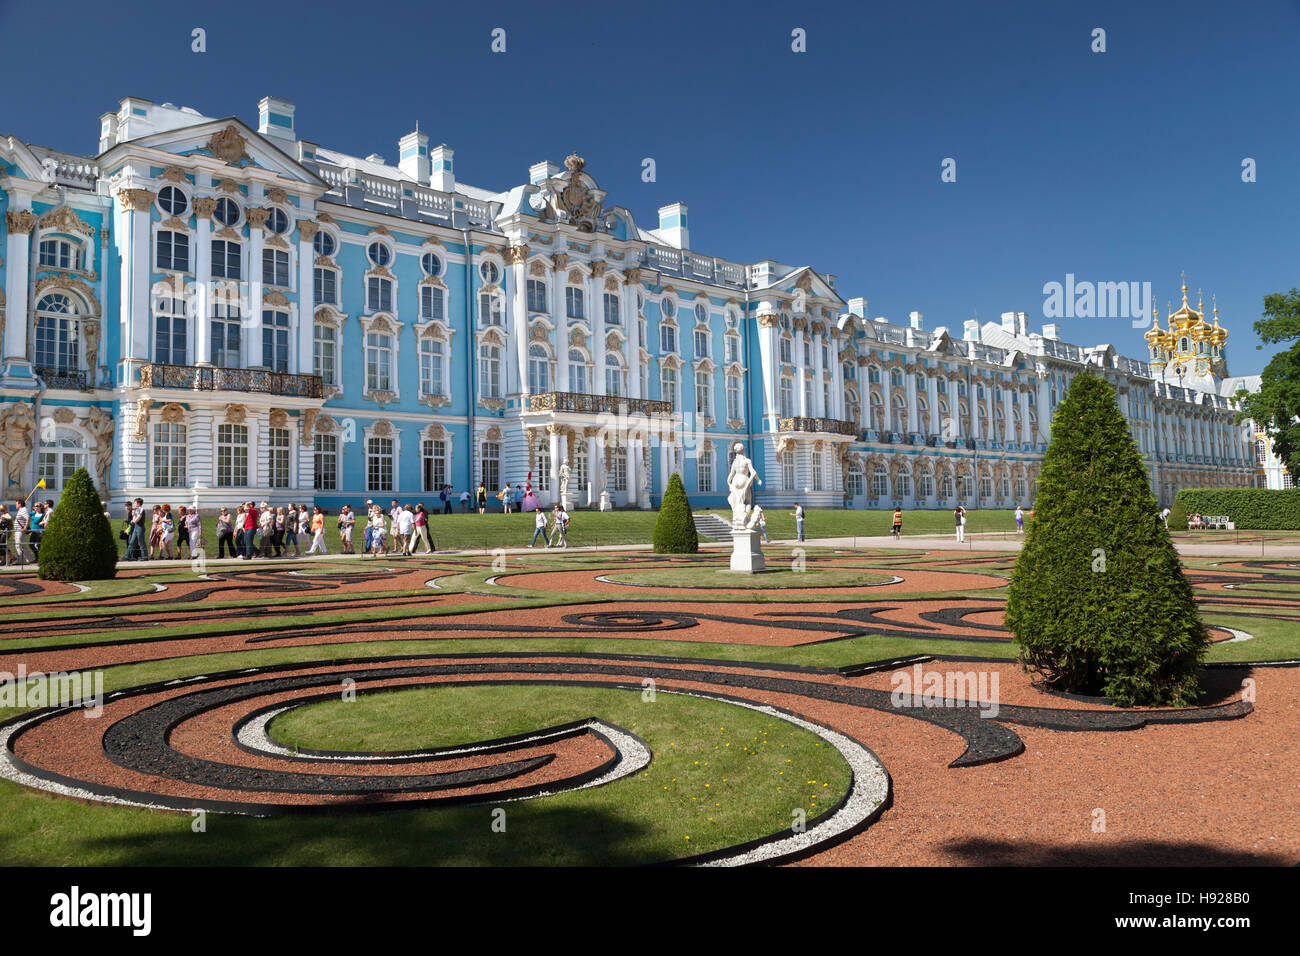 The lavish Catherine Palace located in the town of Pushkin near St Petersburg in Russia. Stock Photo